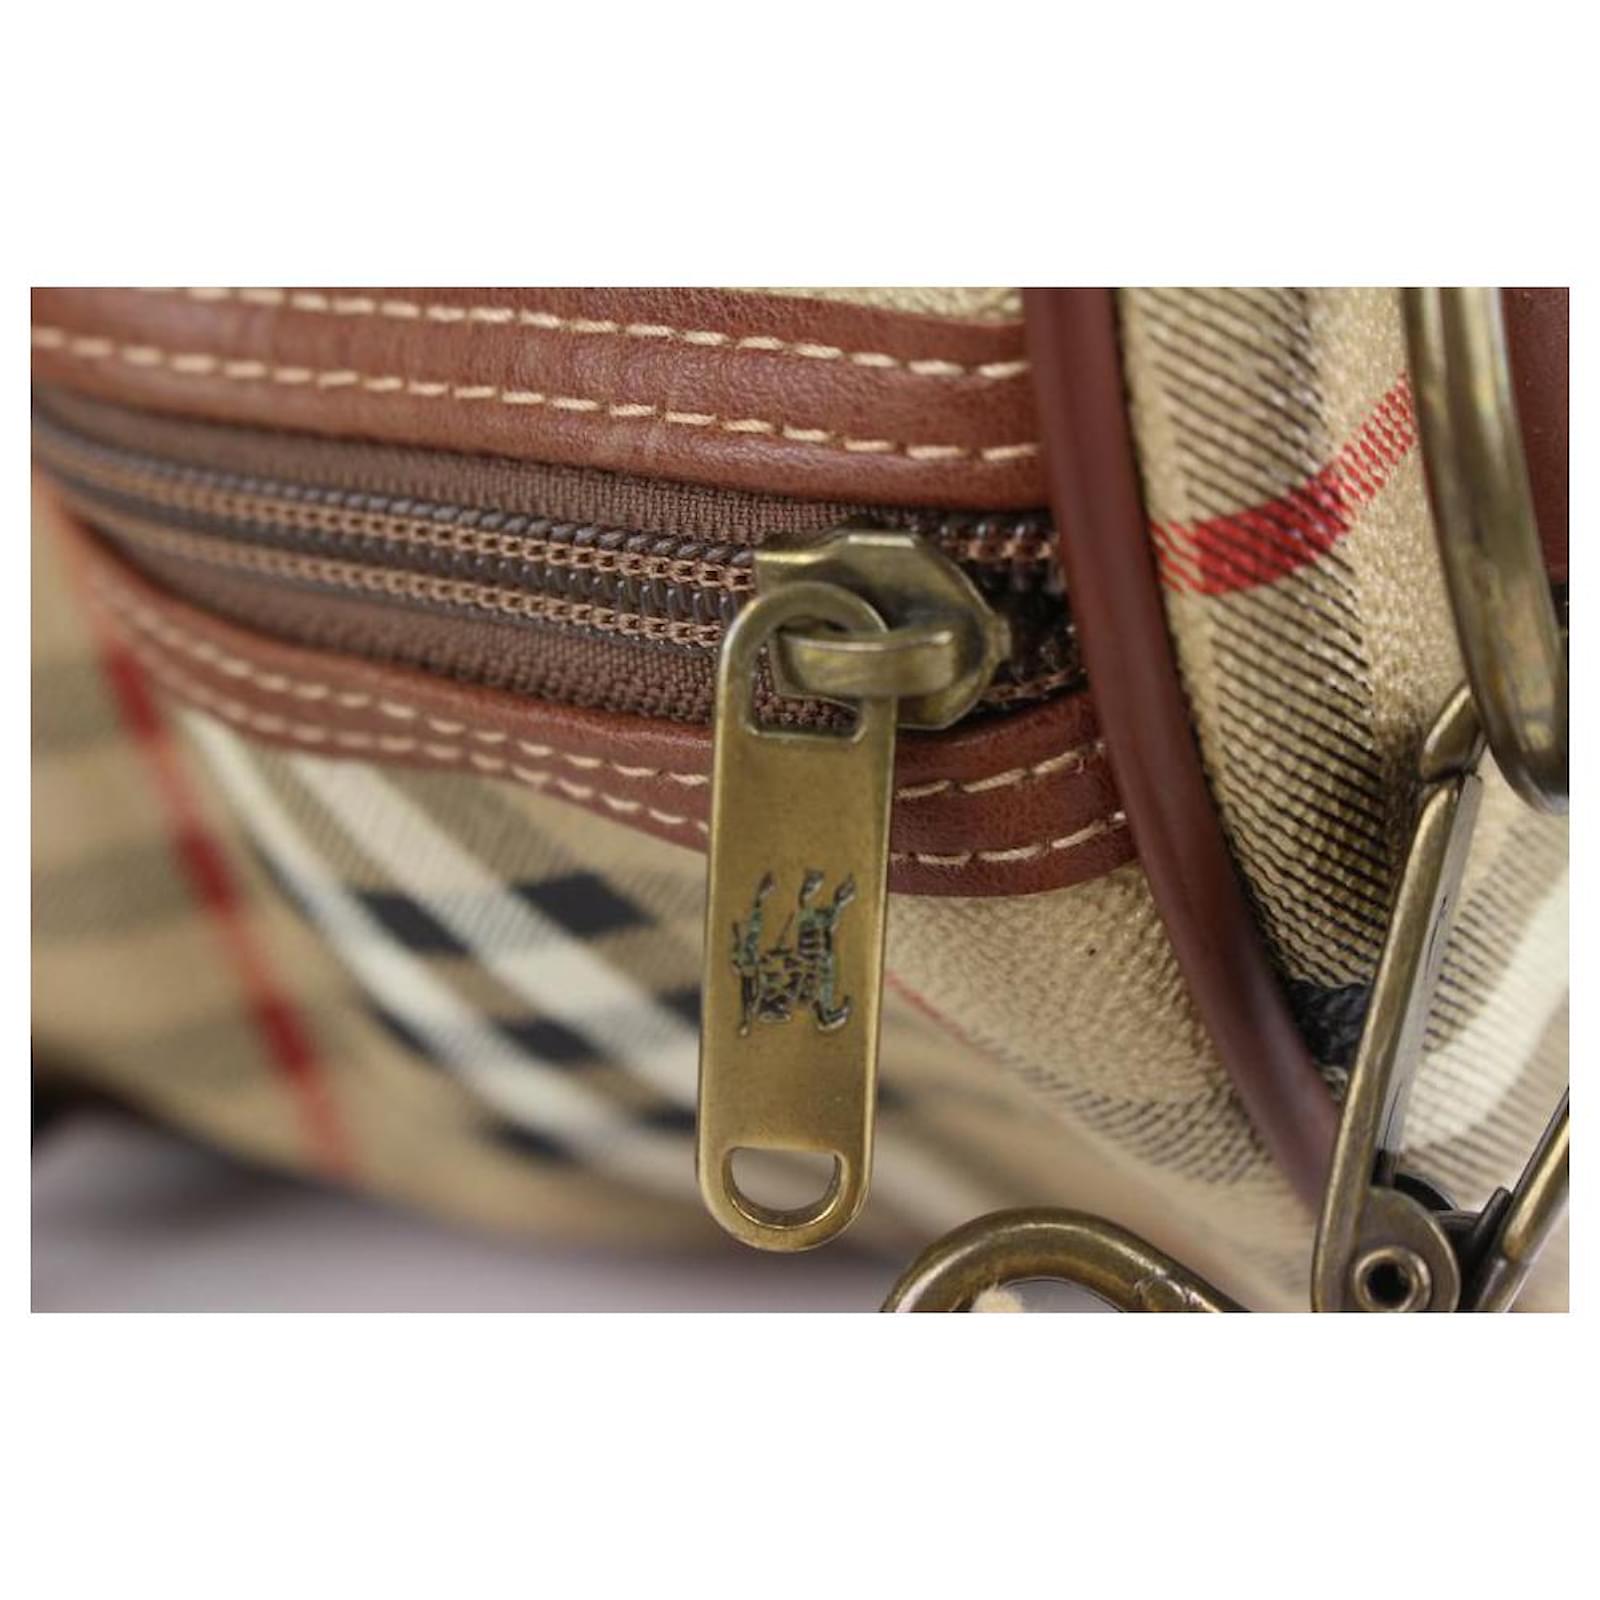 Burberry Beige Nova Check Duffle Bag with Strap Boston Upcycle ready 6 –  Bagriculture